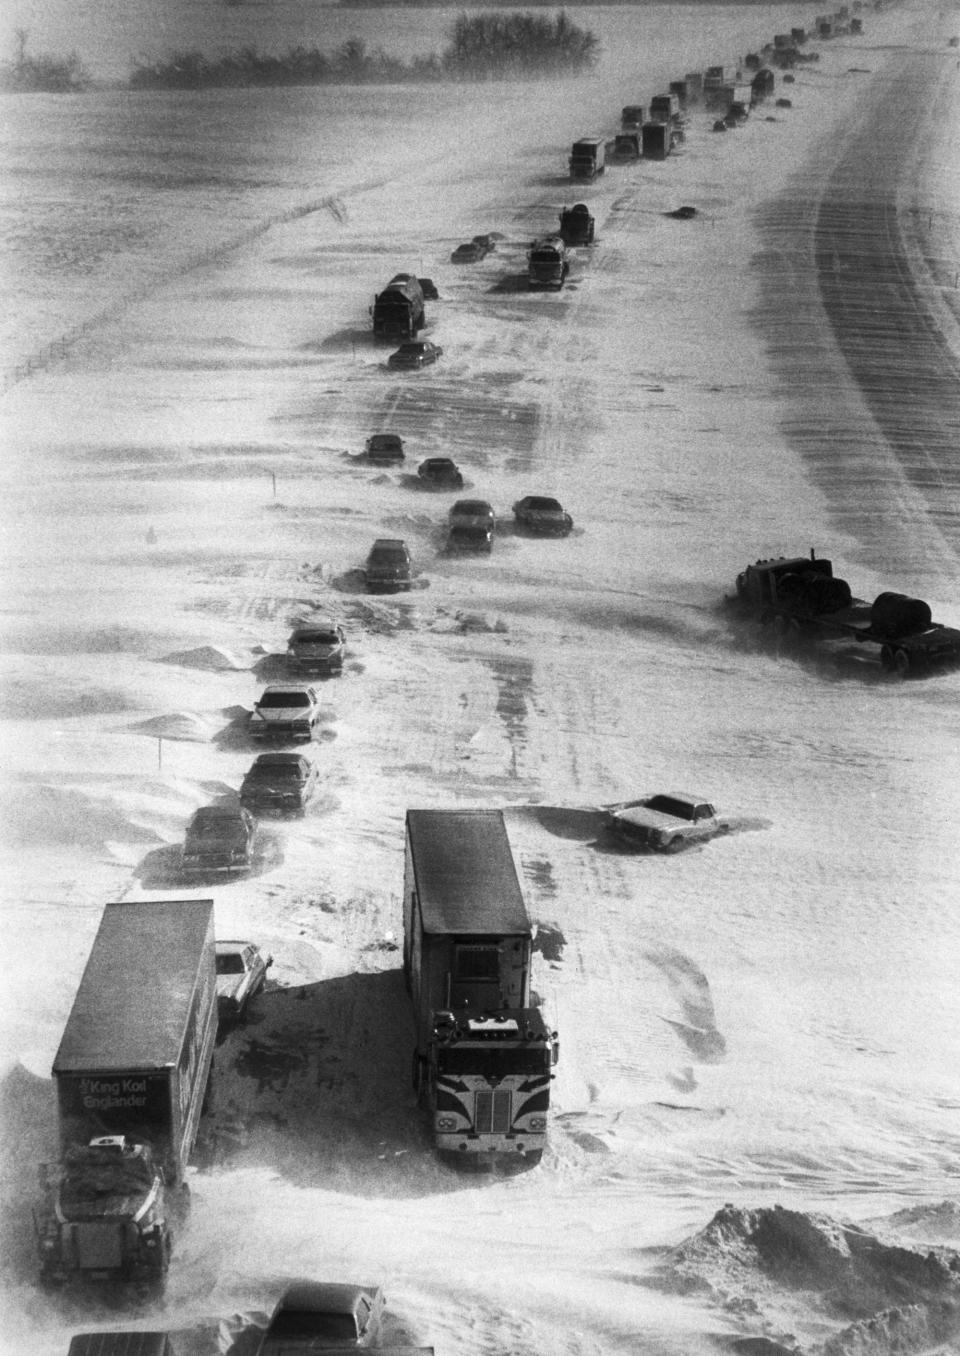 1/29/1977-Lafayette, IN- As far as the eye can see, abandoned vehicles line snowbound I-65 near Lafayette in Central Indiana. Hundreds of truckers and motorists hav taken refuge in nearby towns waiting a break in the bitter sub-zero cold to resume their travels.